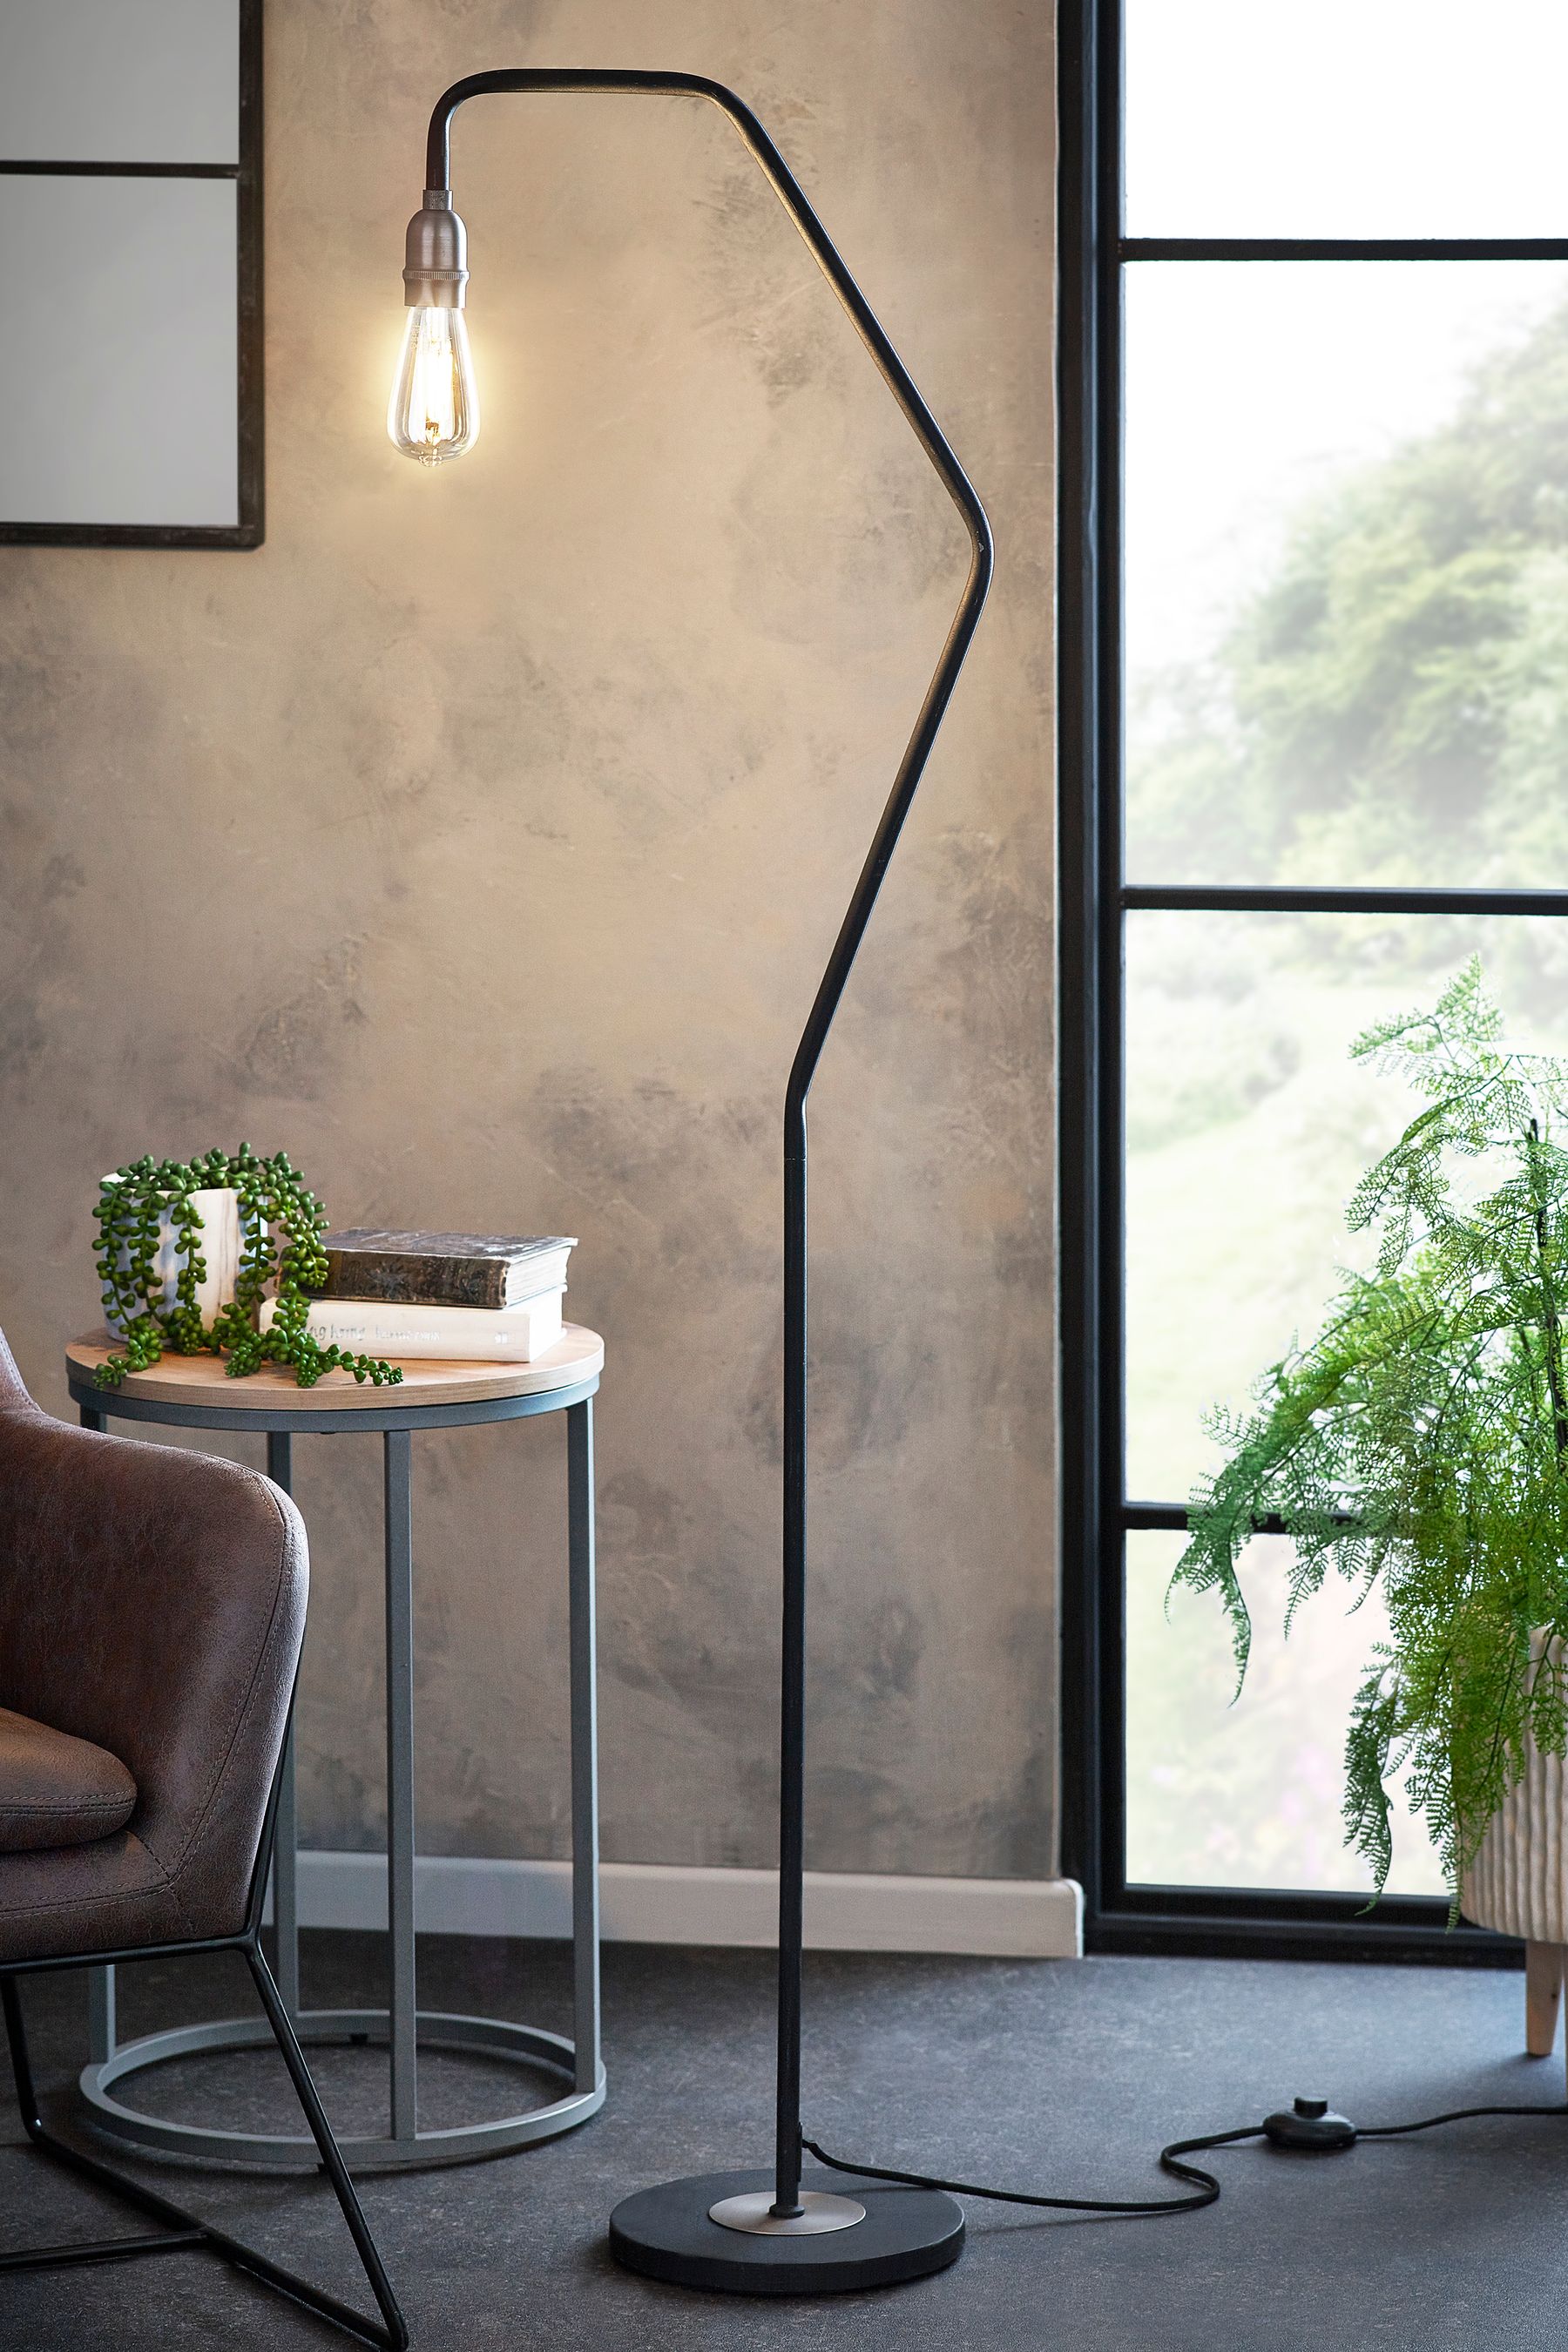 Buy Natural Kita Floor Lamp from the MnjeShops online misprovision